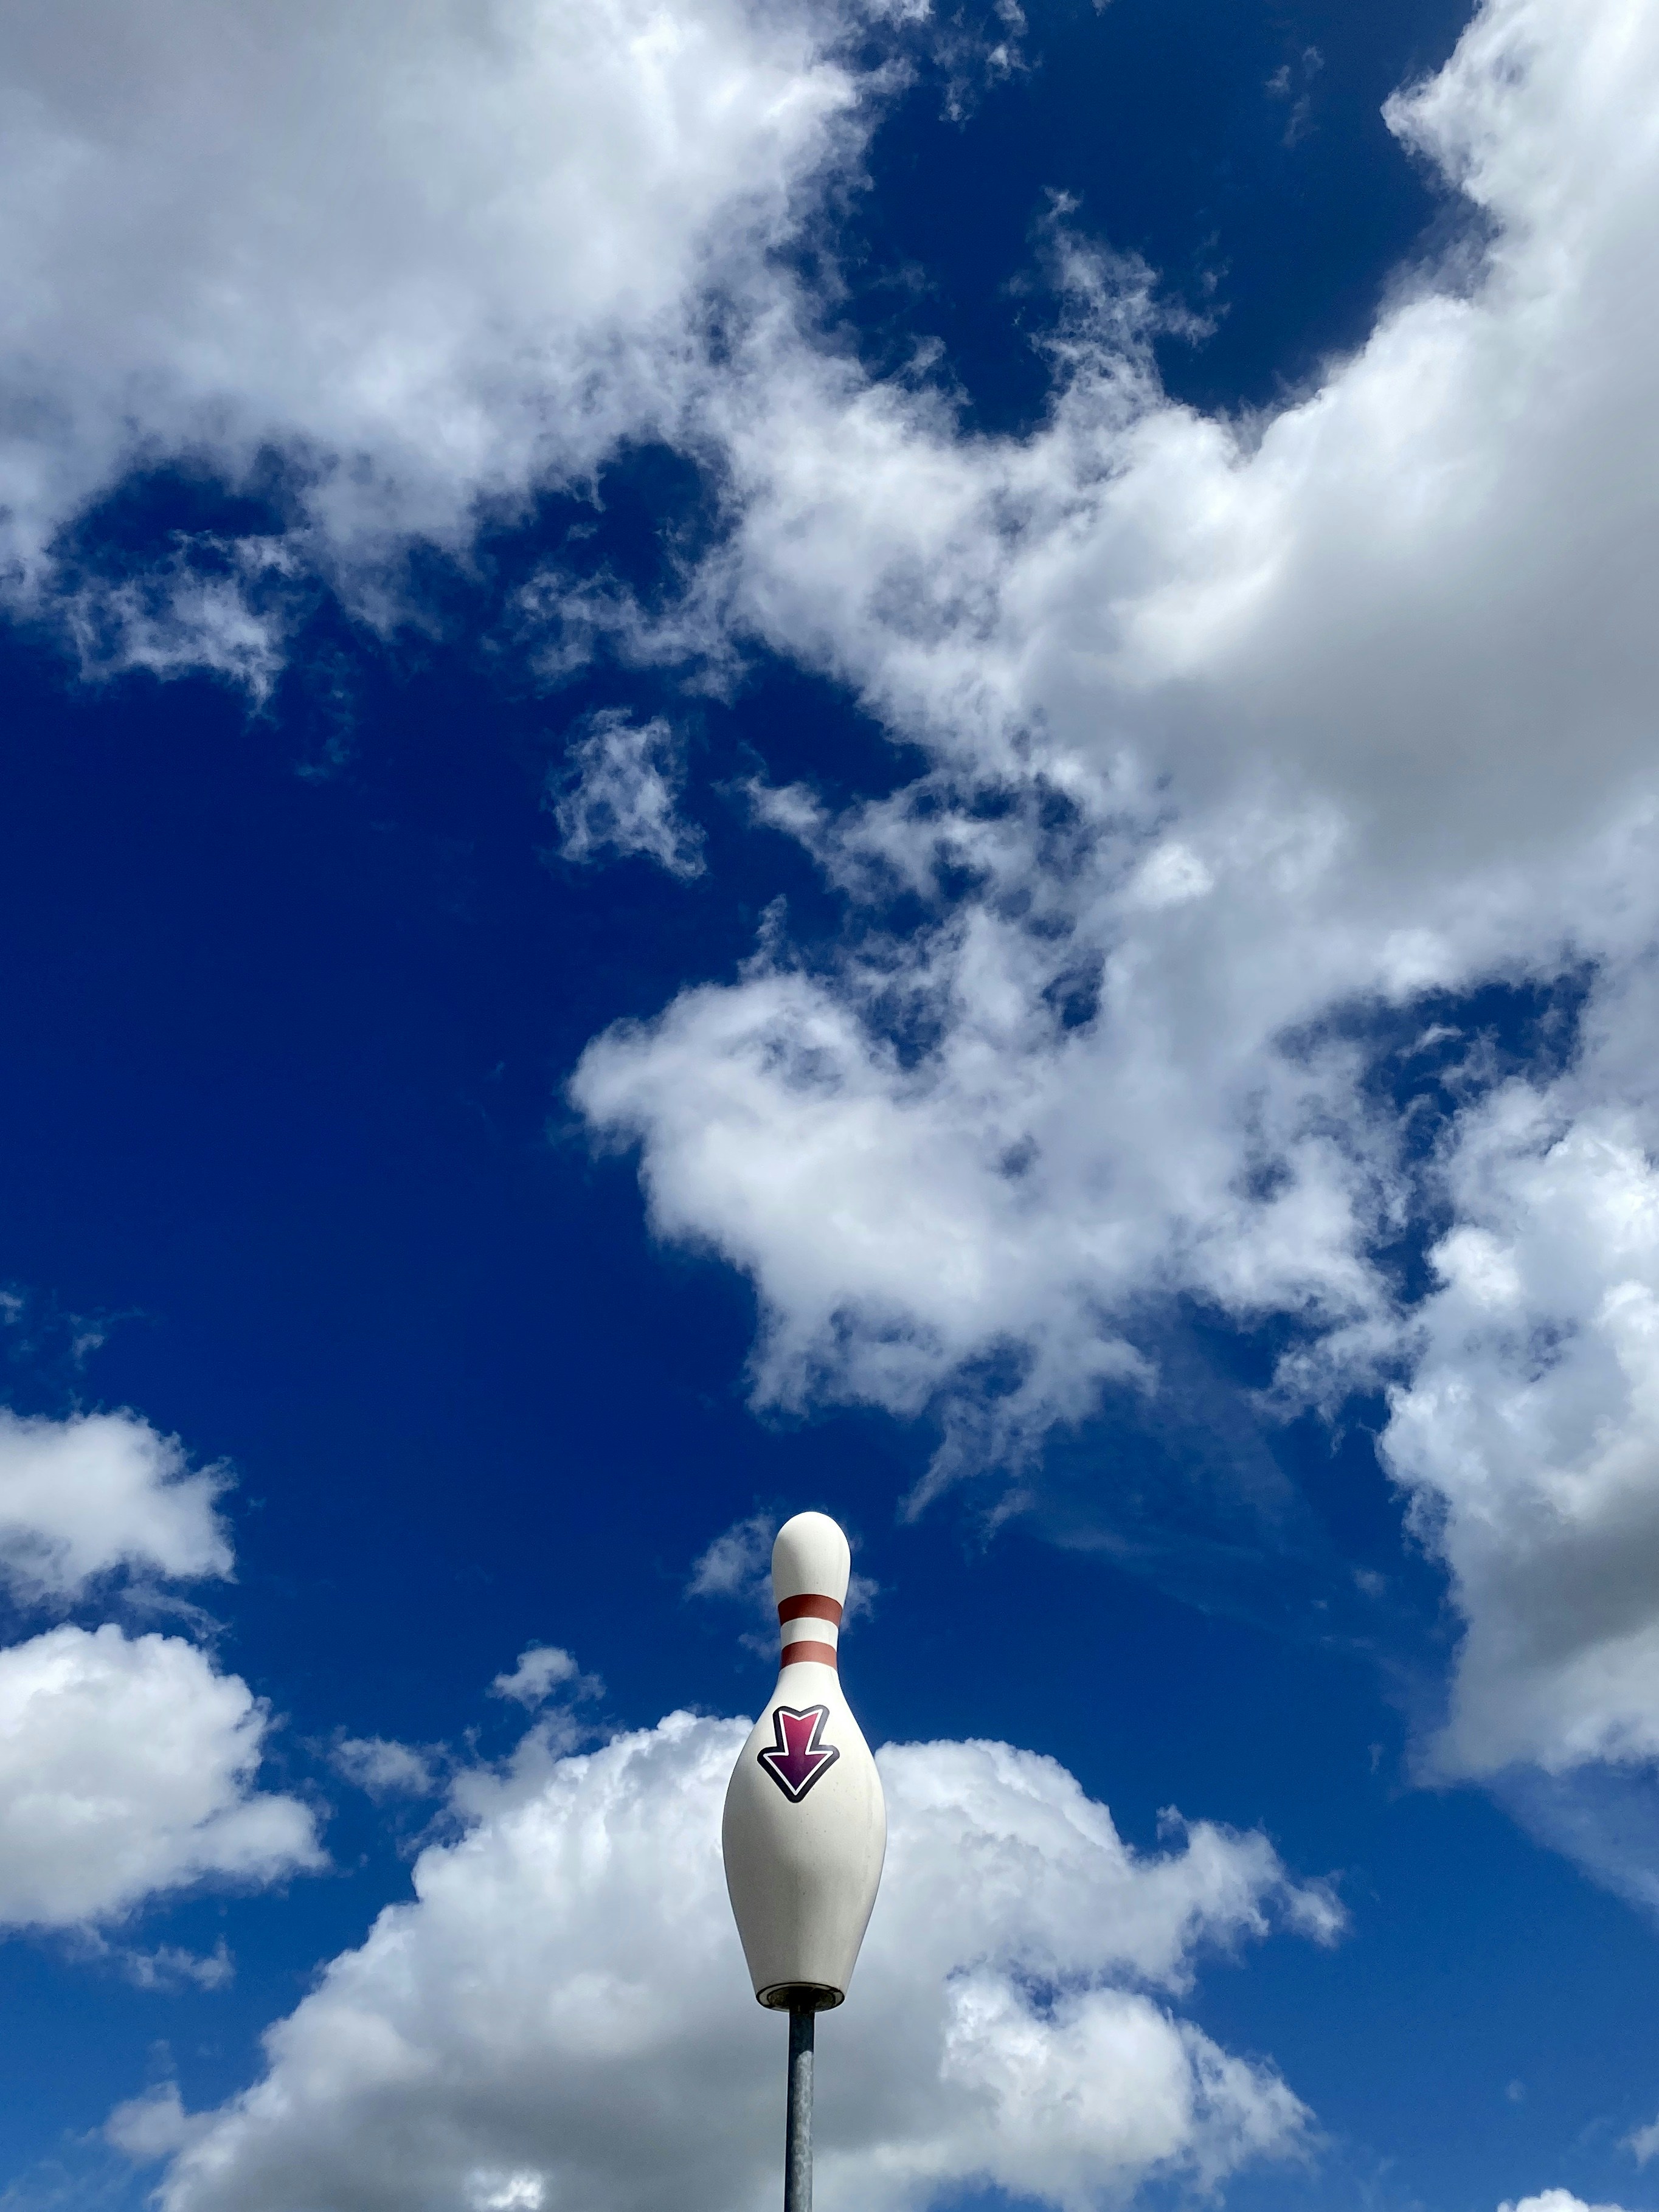 Bowling pin against a cloudy sky